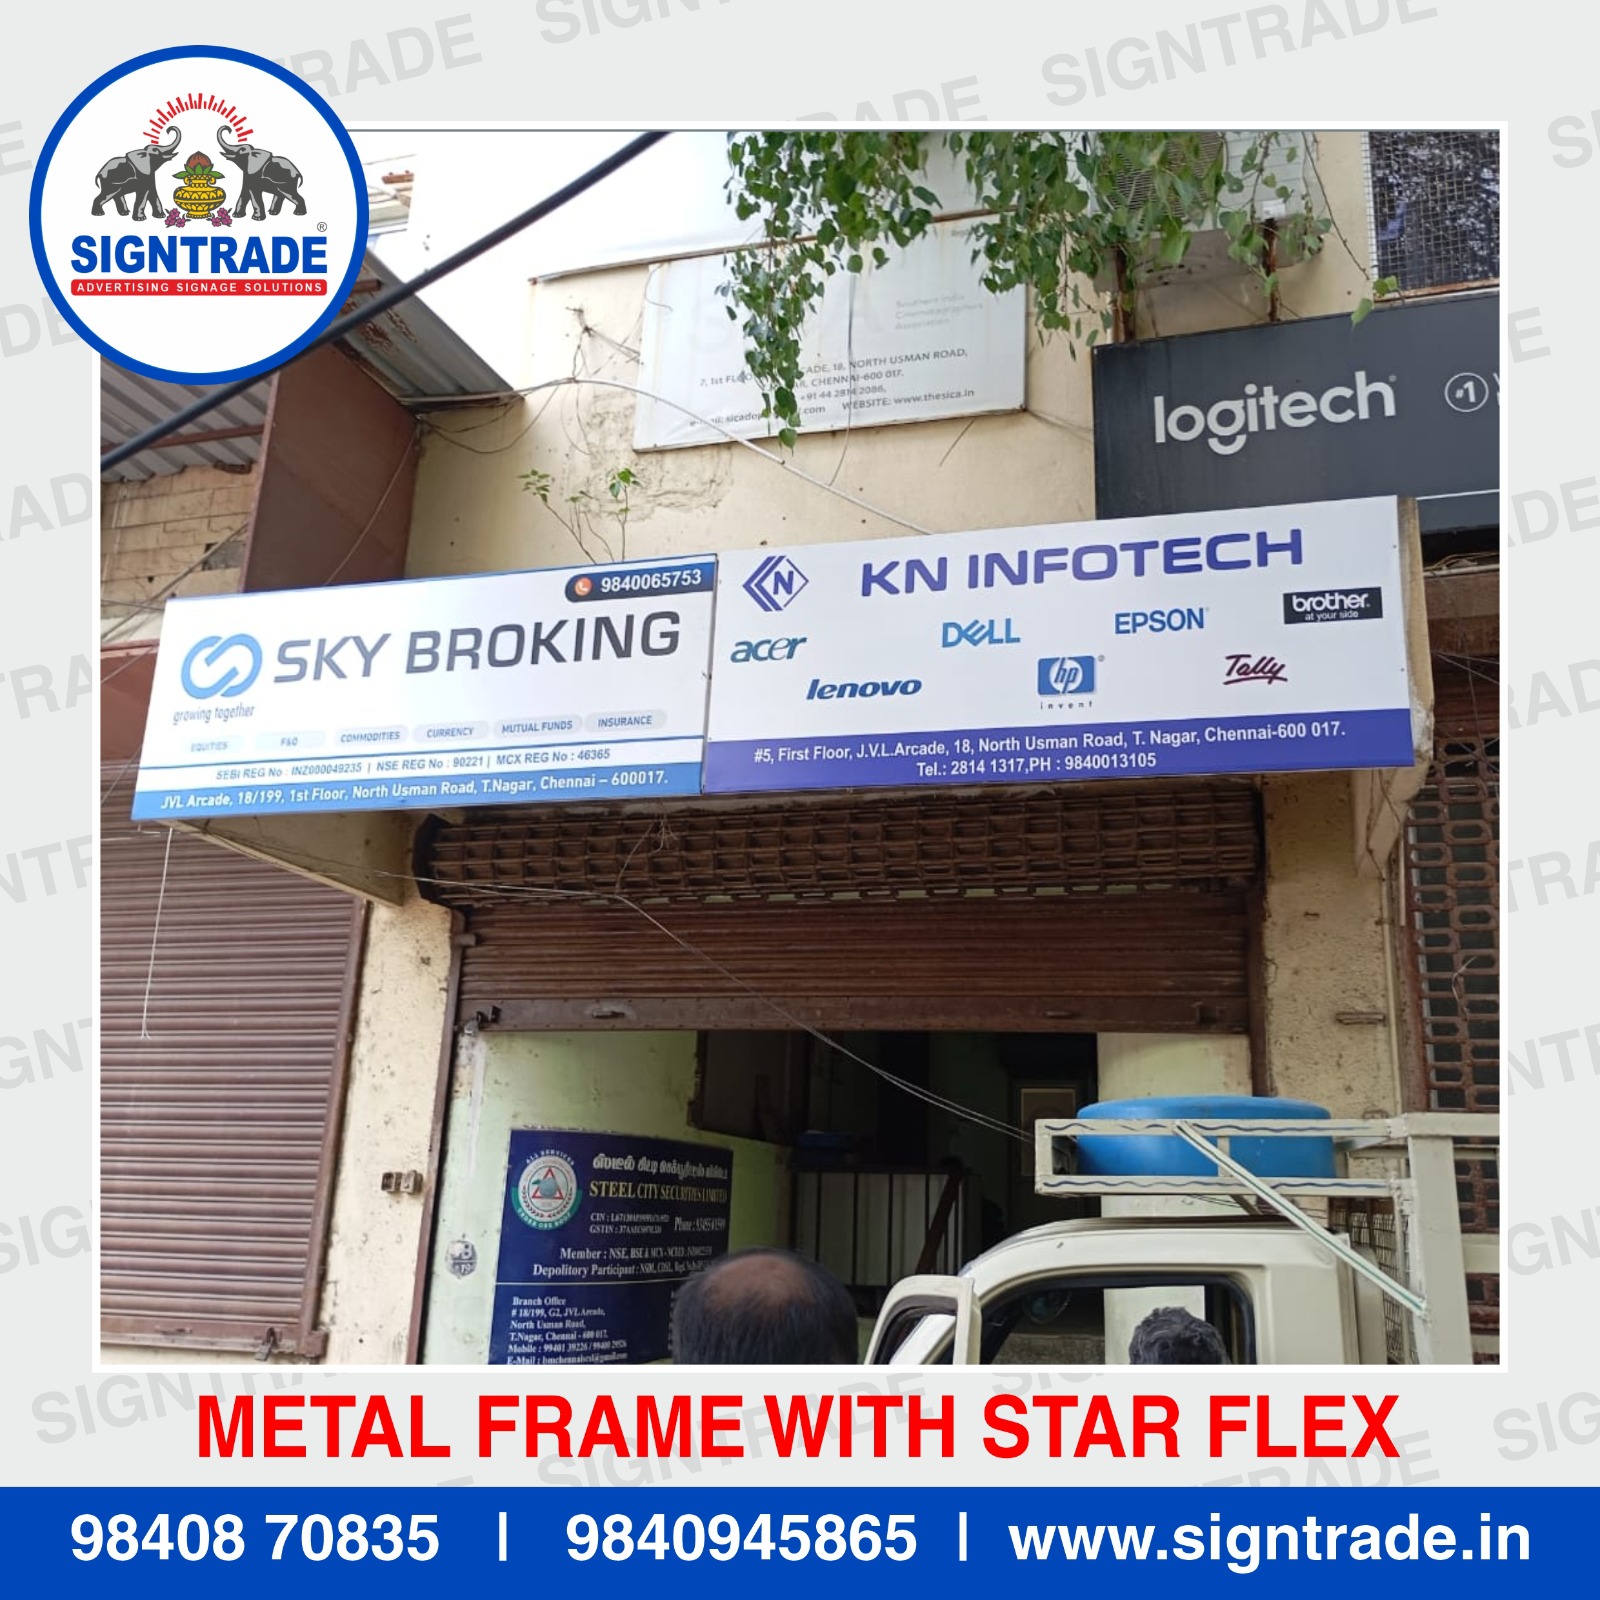 Metal Frame with Star Flex Printing Services in Chennai